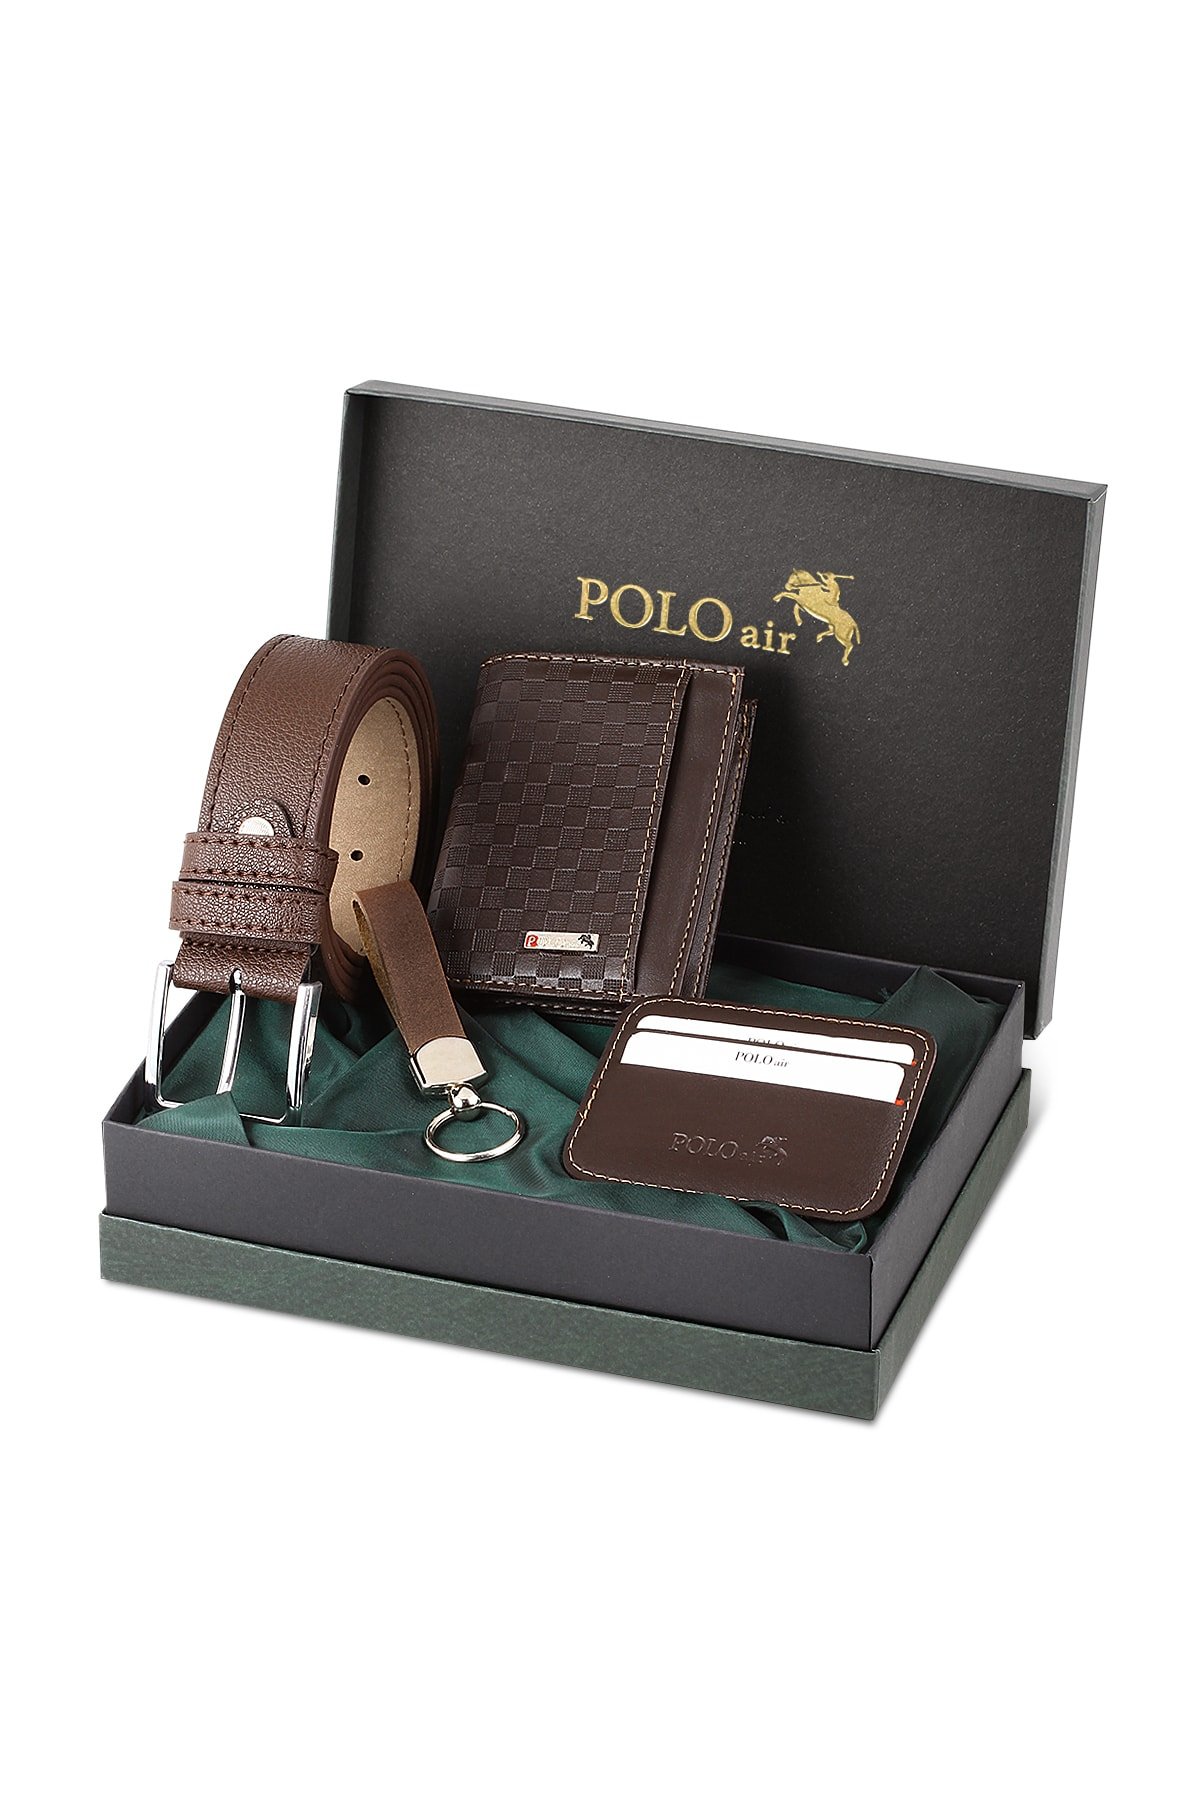 Levně Polo Air Checkerboard Pattern Wallet It Makes It Own Card Holder Belt Keychain Combine Combination Brown Set.